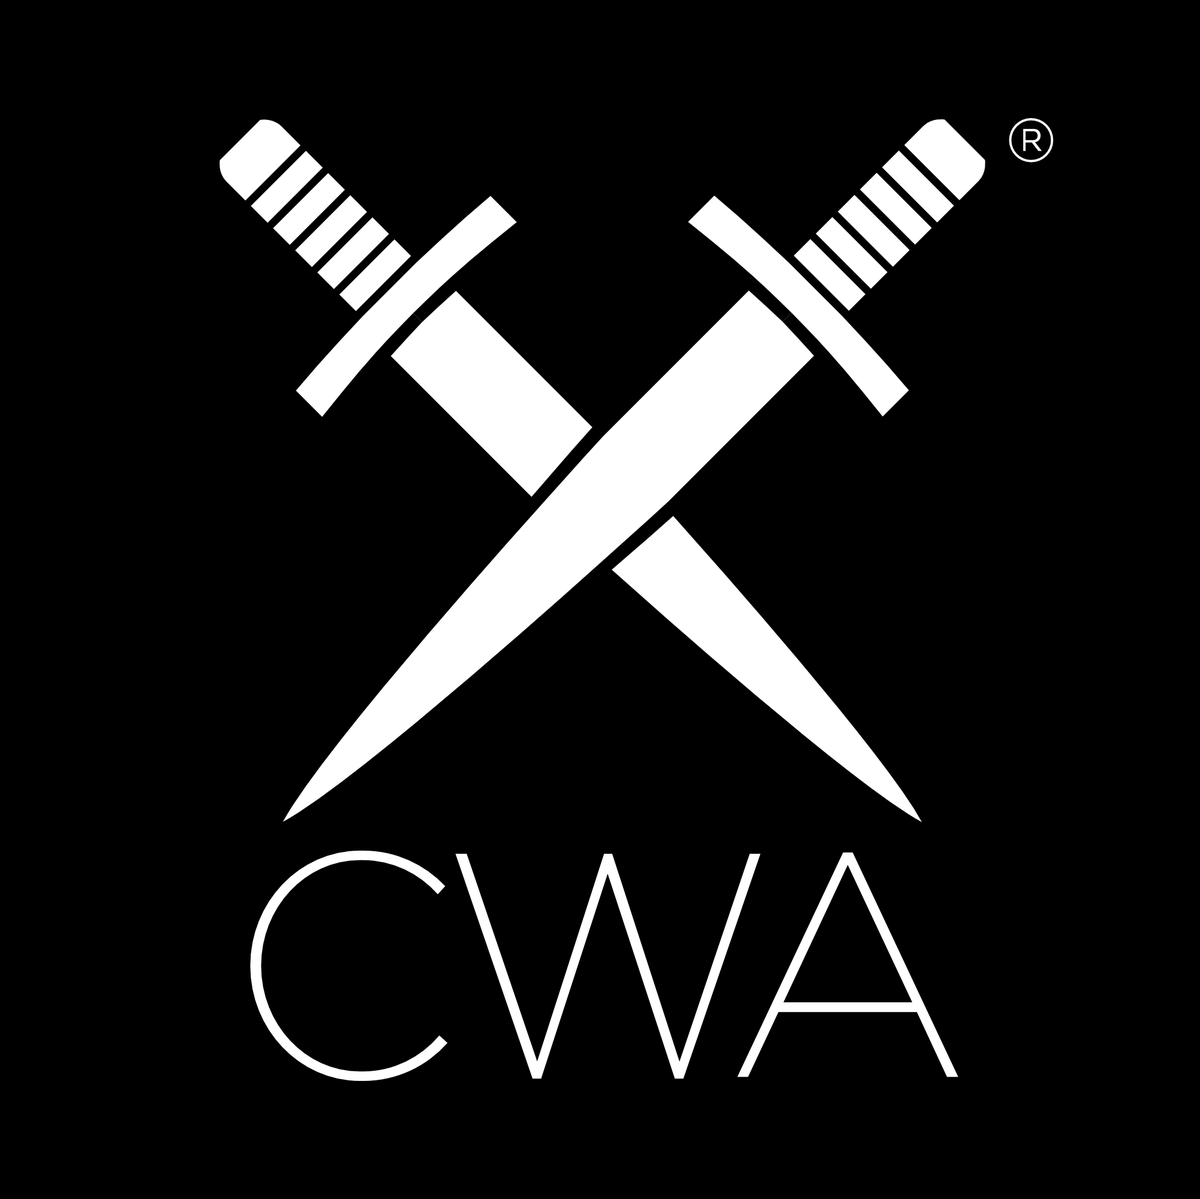 The 2023 CWA Debut Dagger competition is open for entries. M W Craven, who won the 2022 Ian Fleming Steel Dagger, said that, “The CWA Debut Dagger competition gave me a career.” For details on how to enter, go to ow.ly/qVfM50Lgnq0. @The_CWA @MWCravenUK